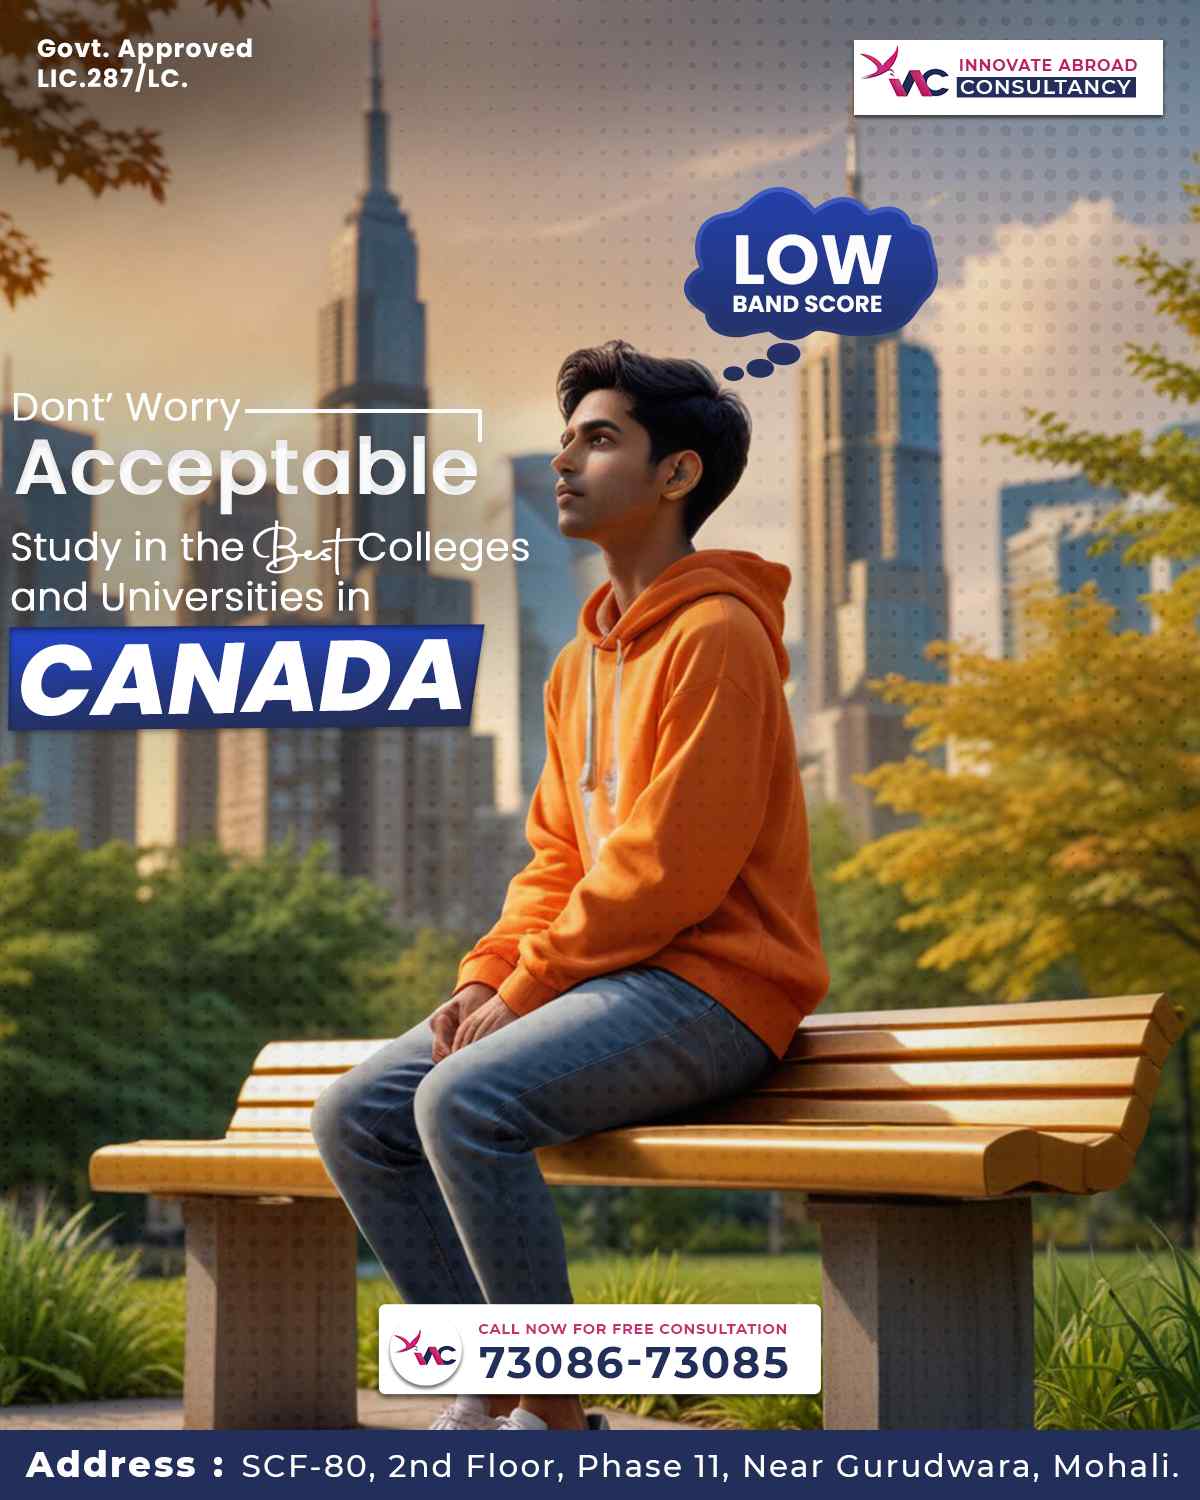 Canada low band score